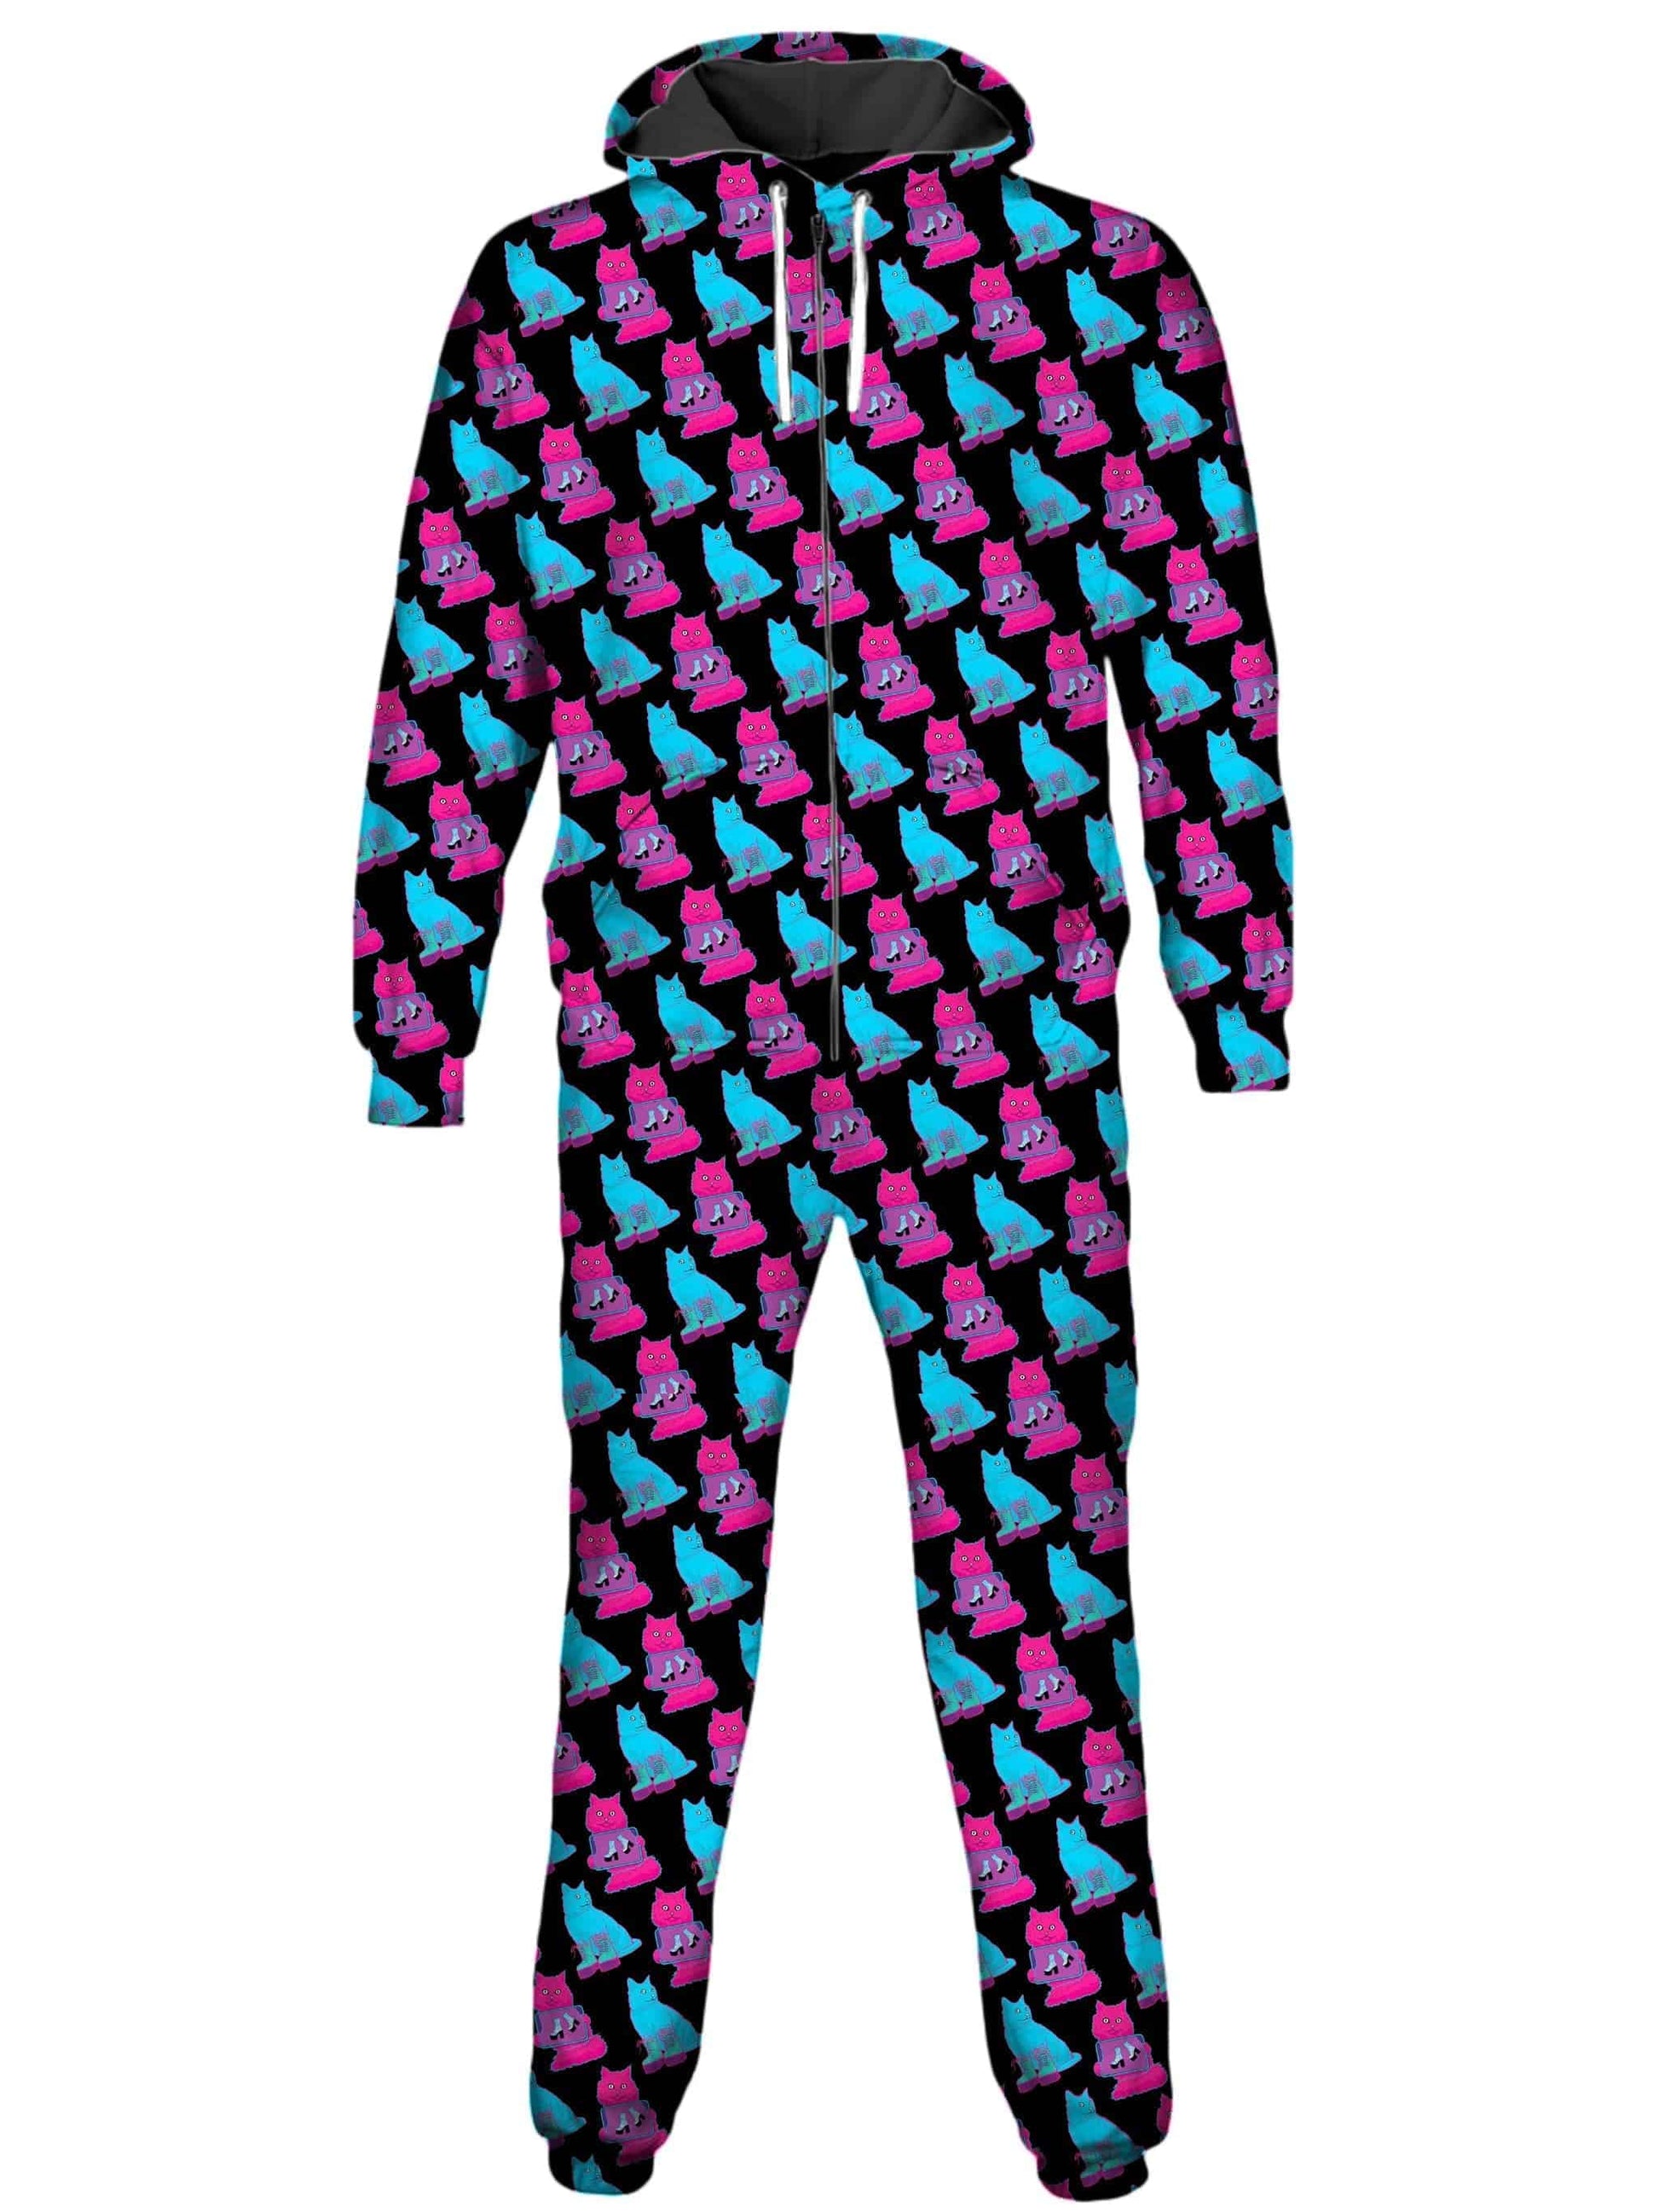 Boots N Cats Onesie, Noctum X Truth, | iEDM